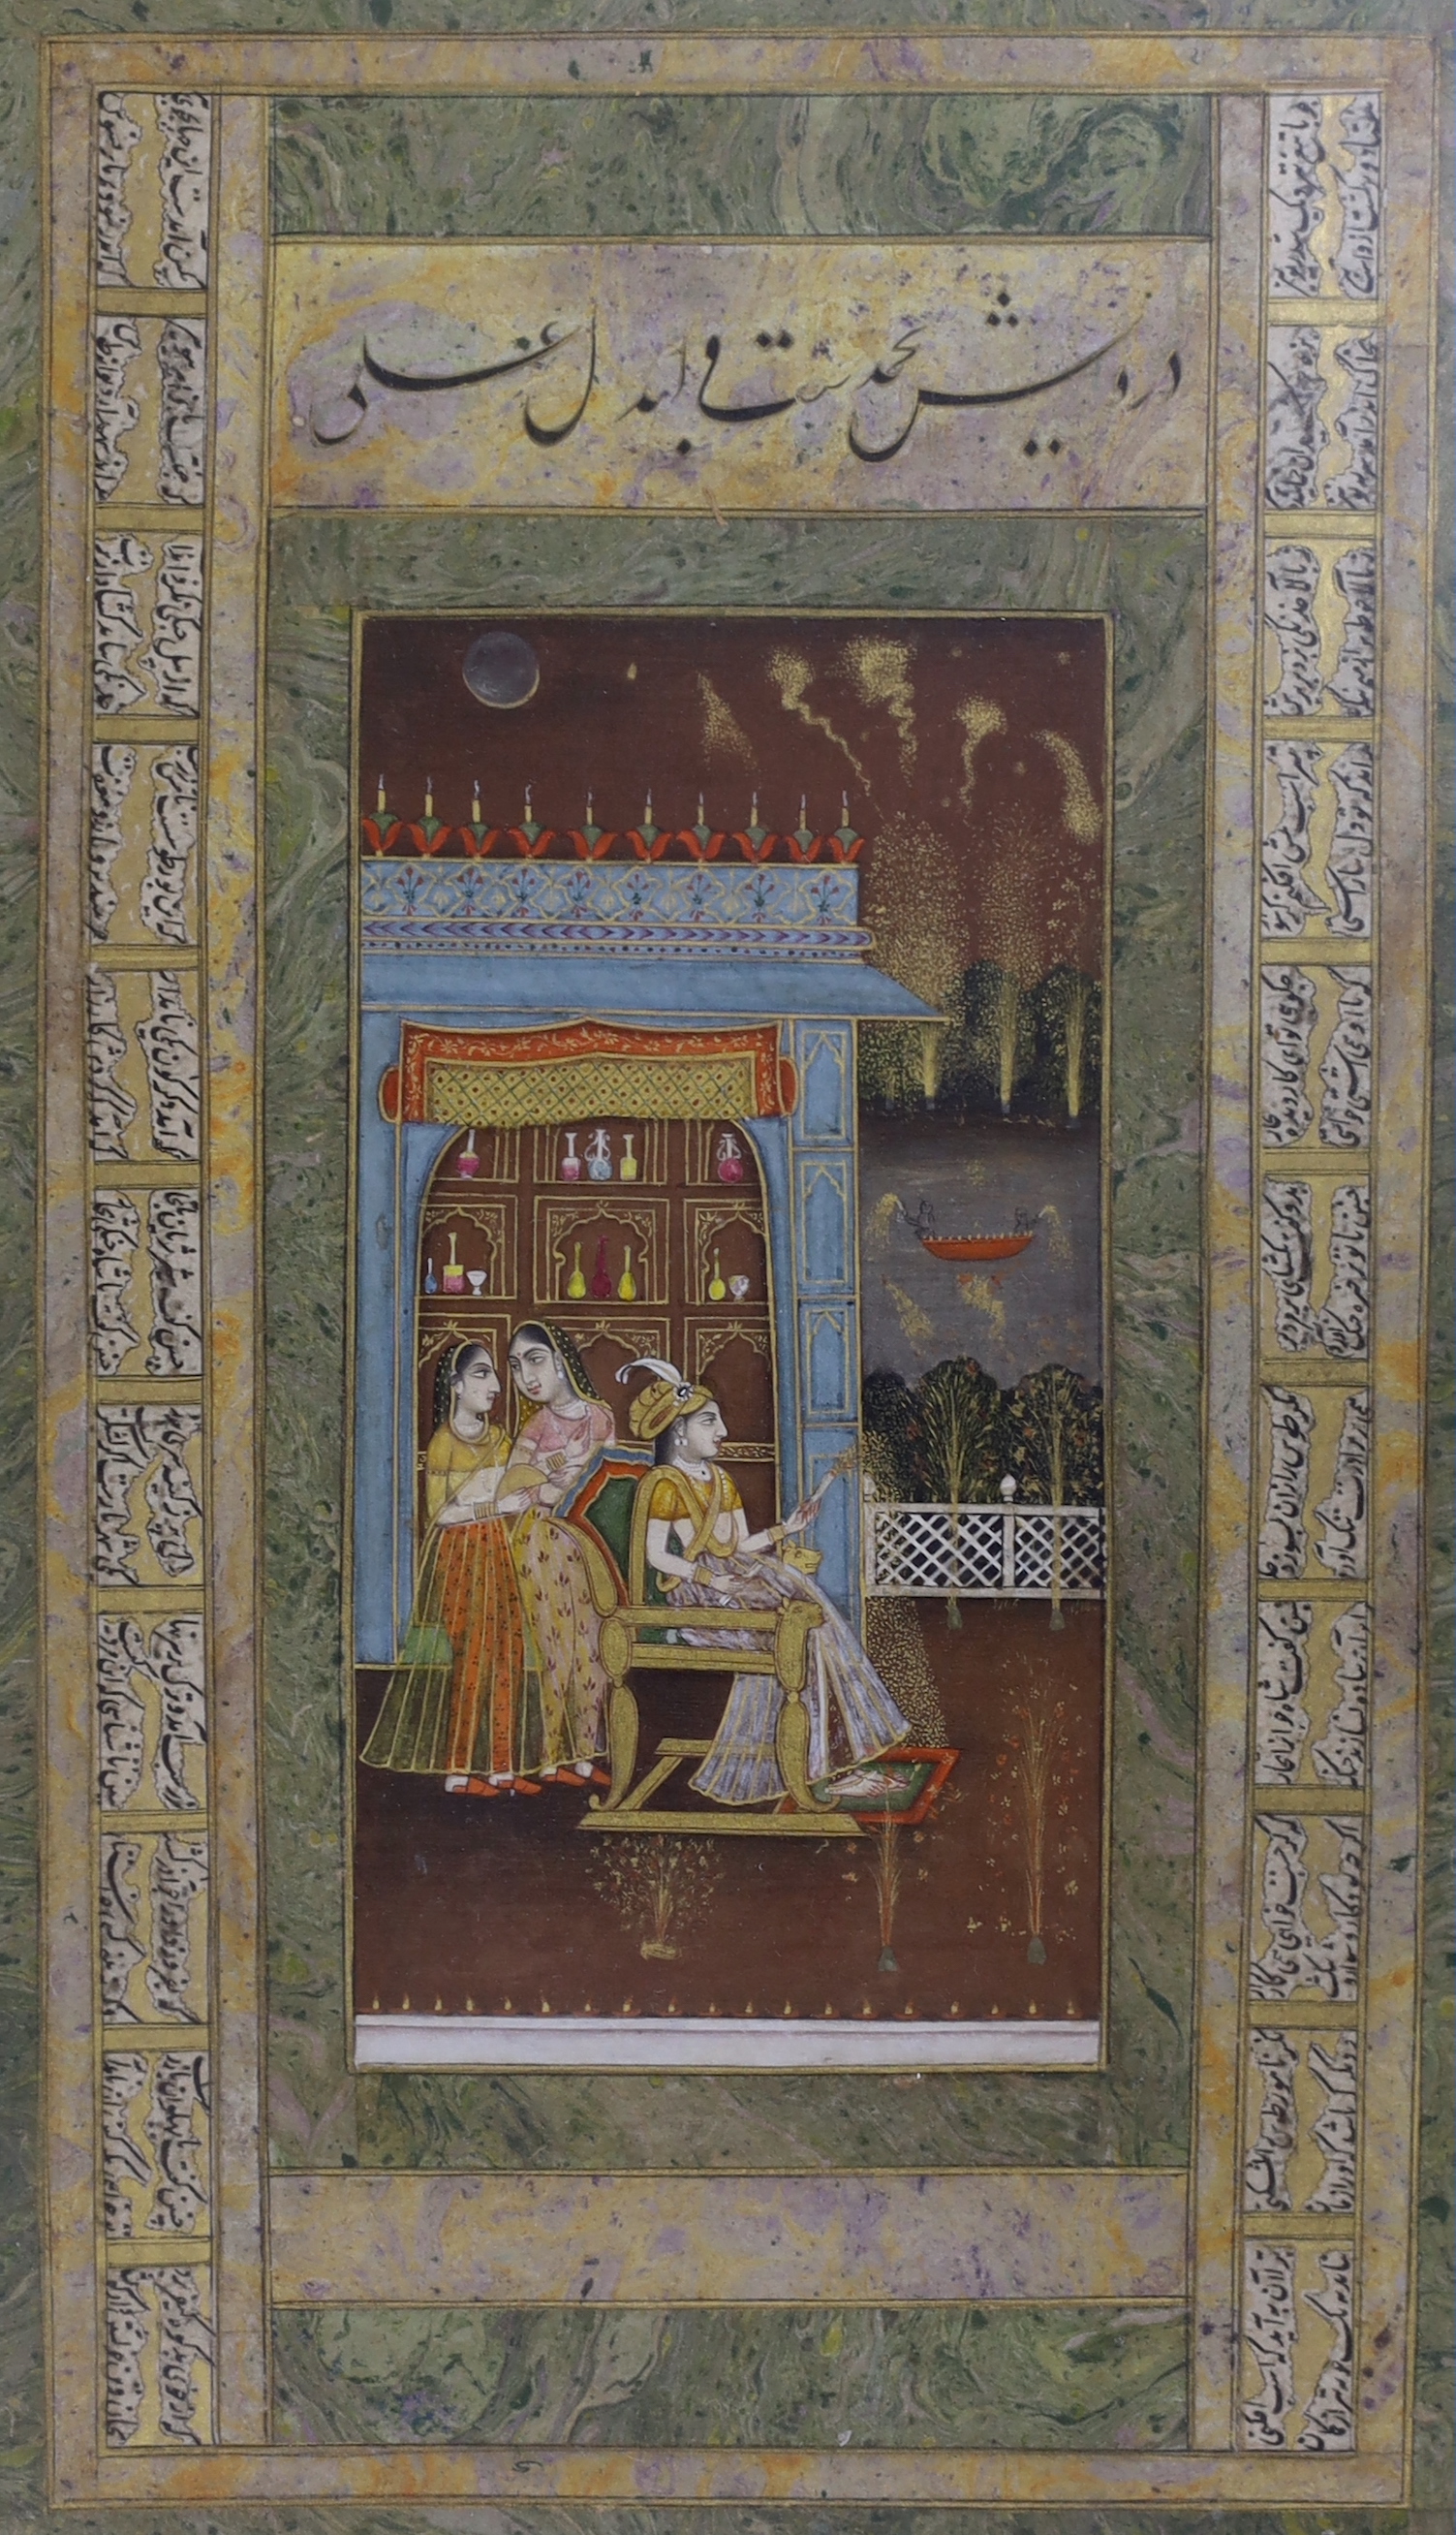 An Indian Mughal style gouache of a court scene with marbled and inscribed borders, 26 x 15cm